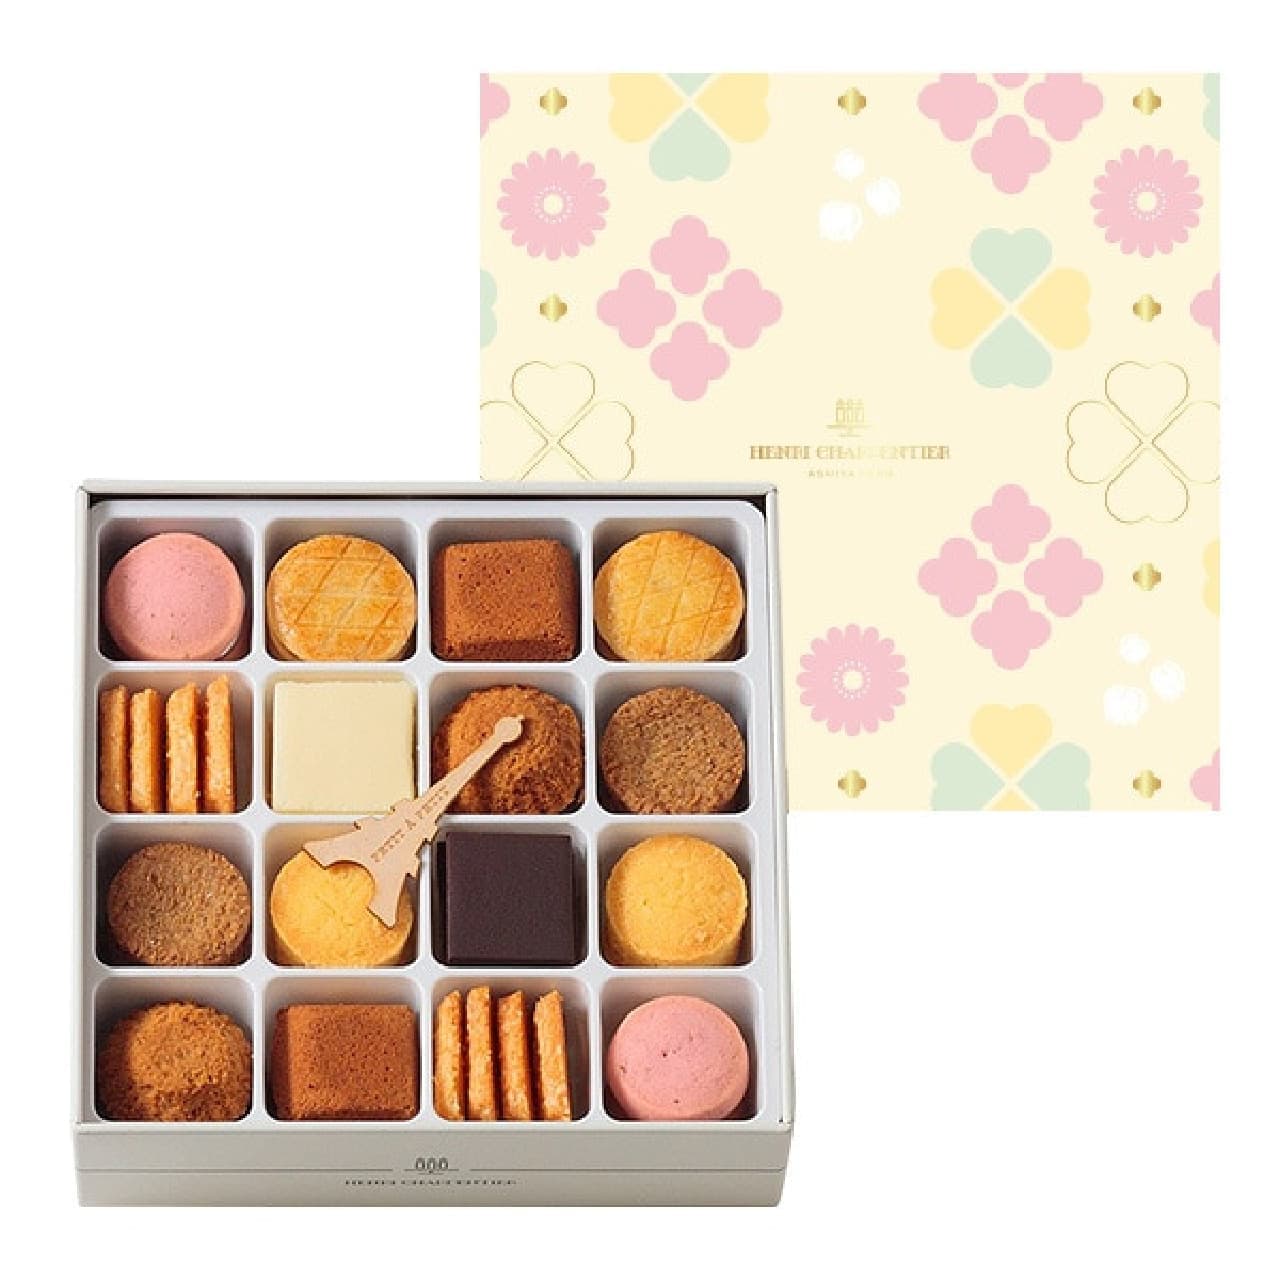 Special summer gift sweets available at Henri Charpentier! (Also recommended gifts for the mid-summer holidays)